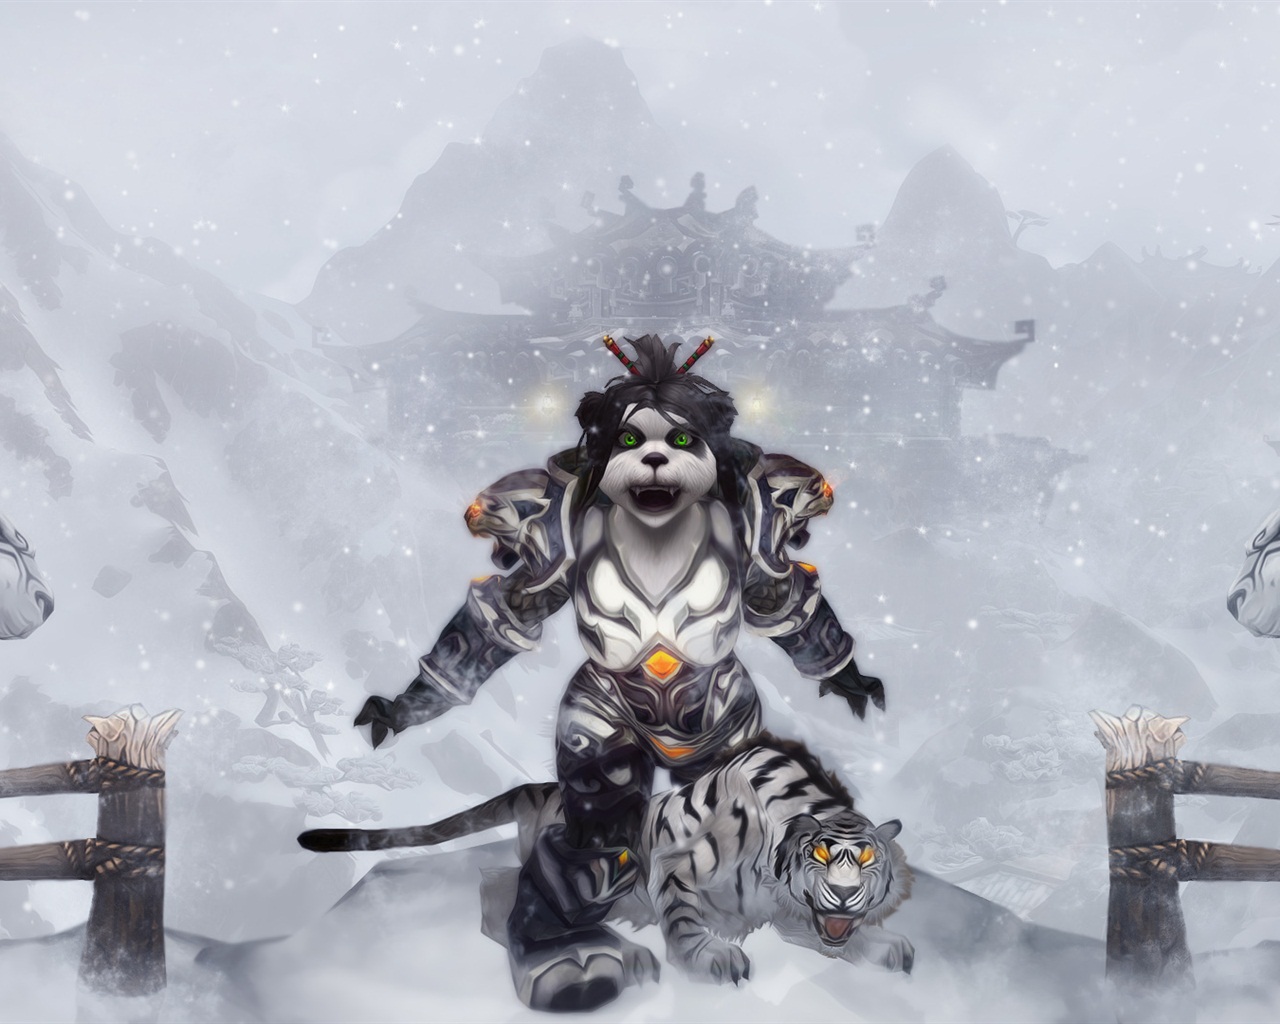 World of Warcraft: Mists of Pandaria HD wallpapers #4 - 1280x1024